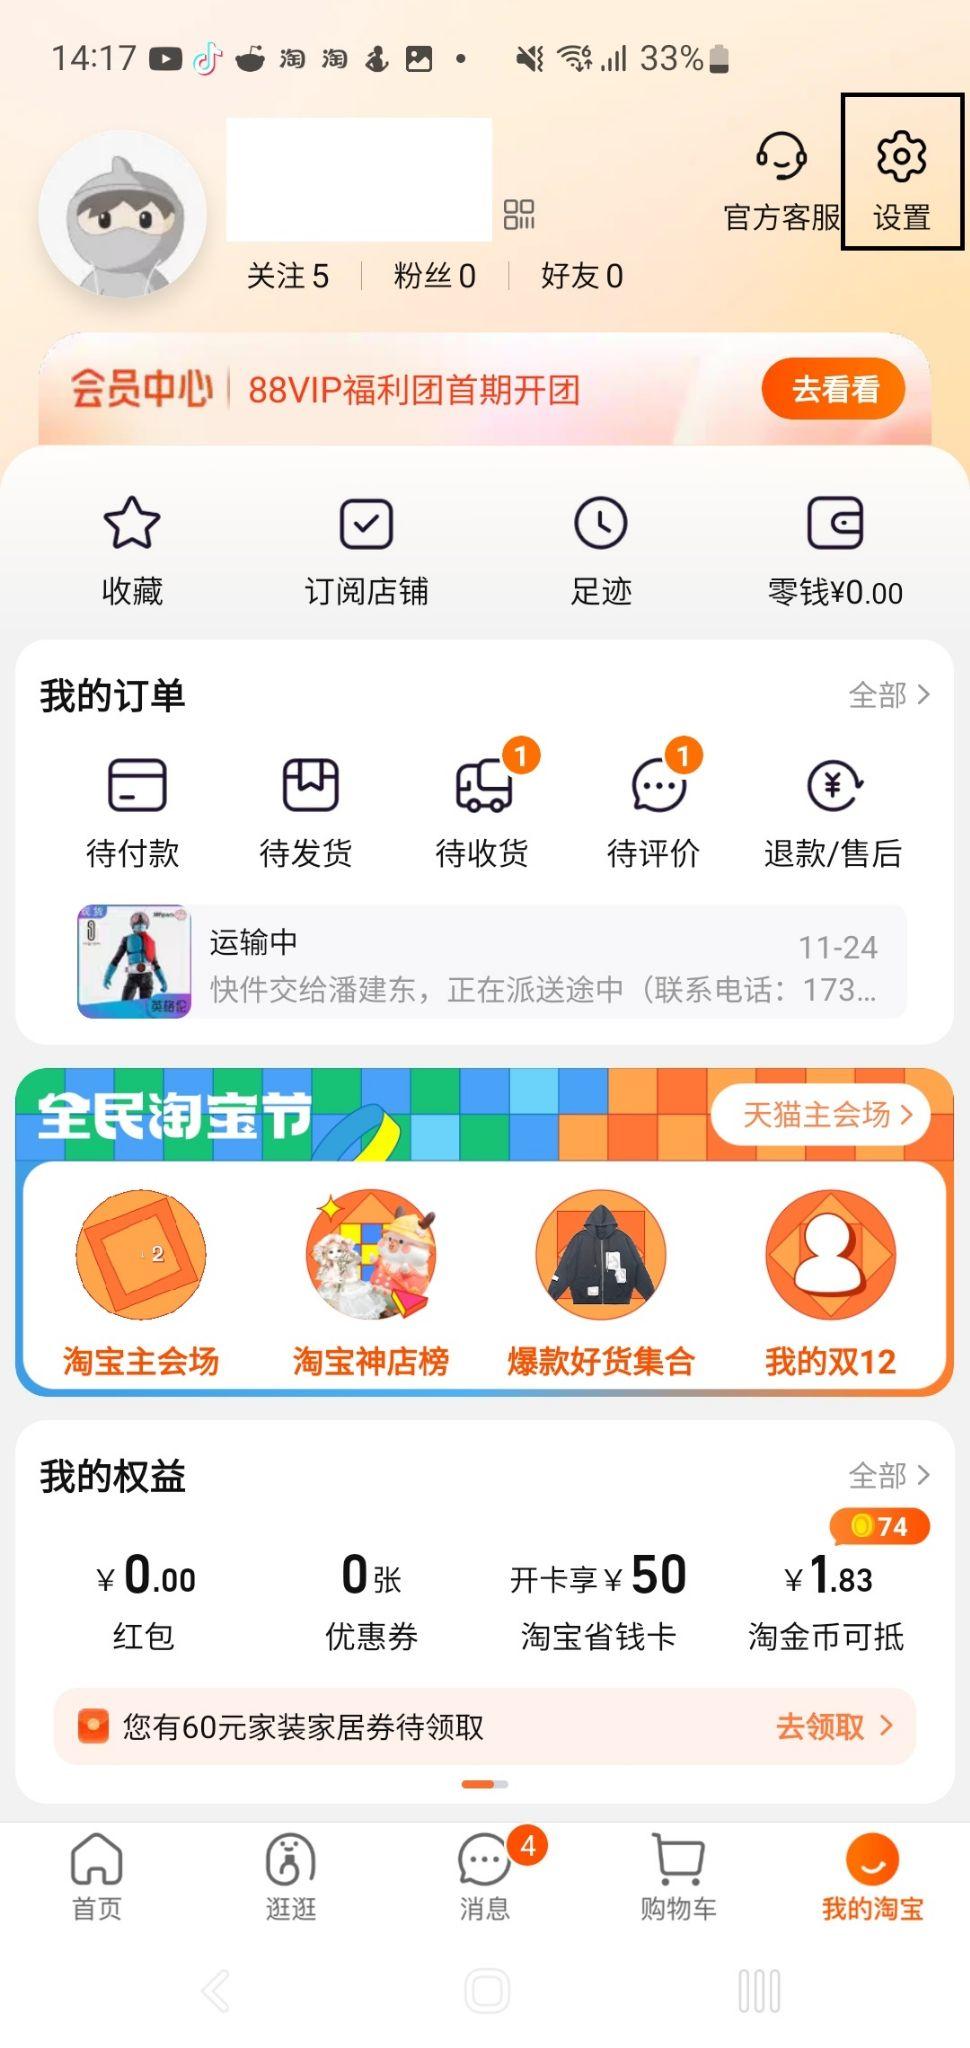 Change phone number on mobile to manage your Taobao account